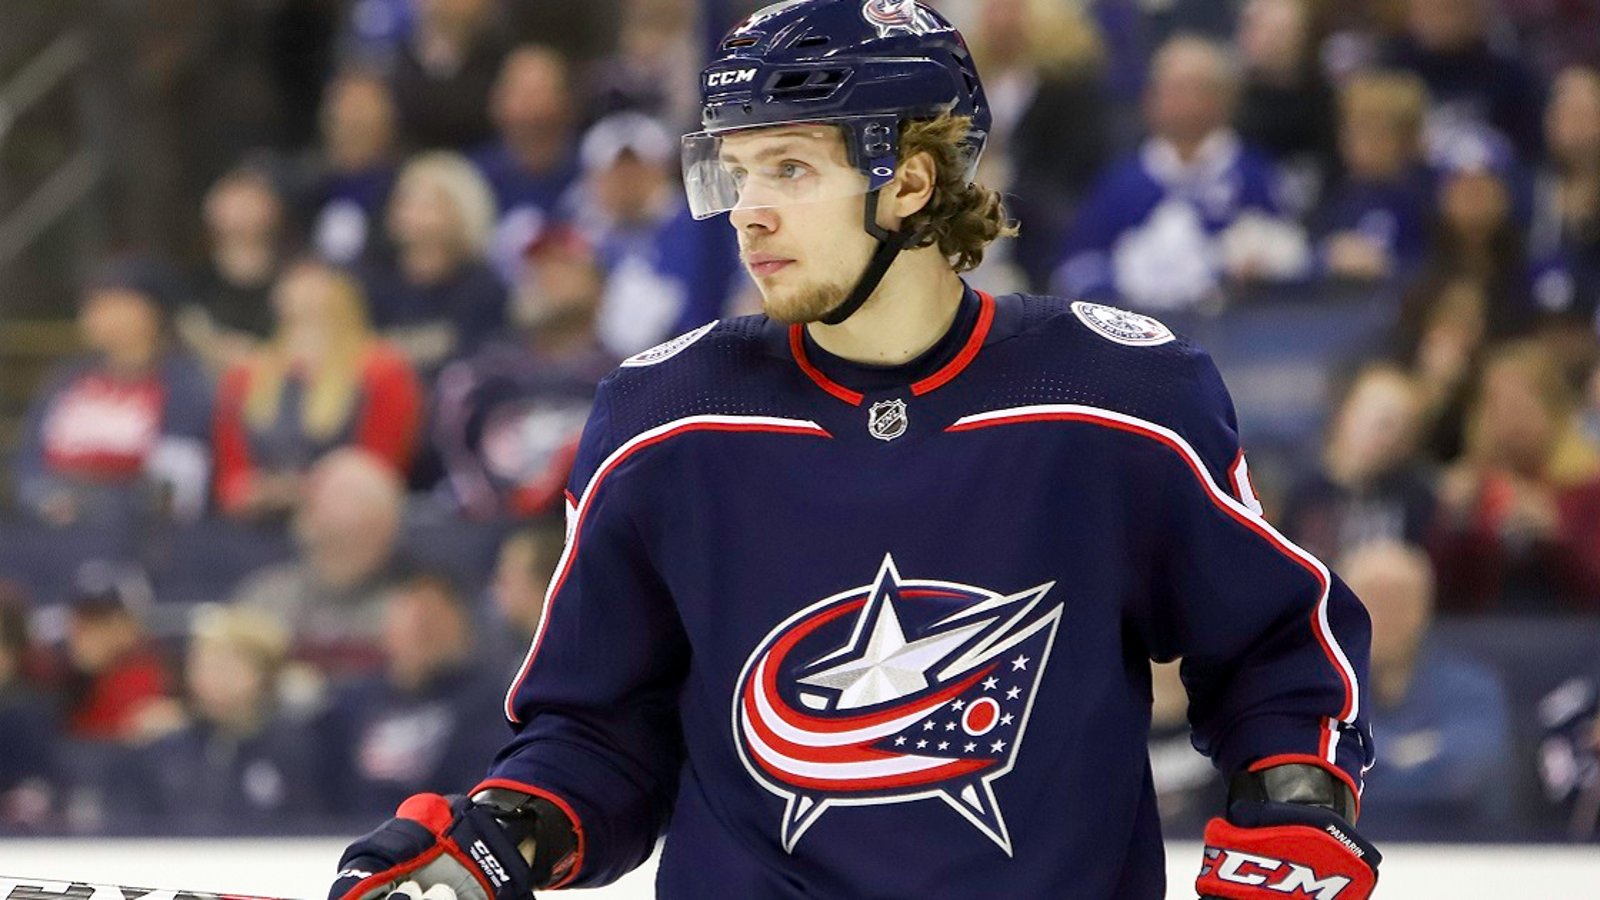 Breaking: Artemi Panarin leaves the ice, unable to put weight on his leg.